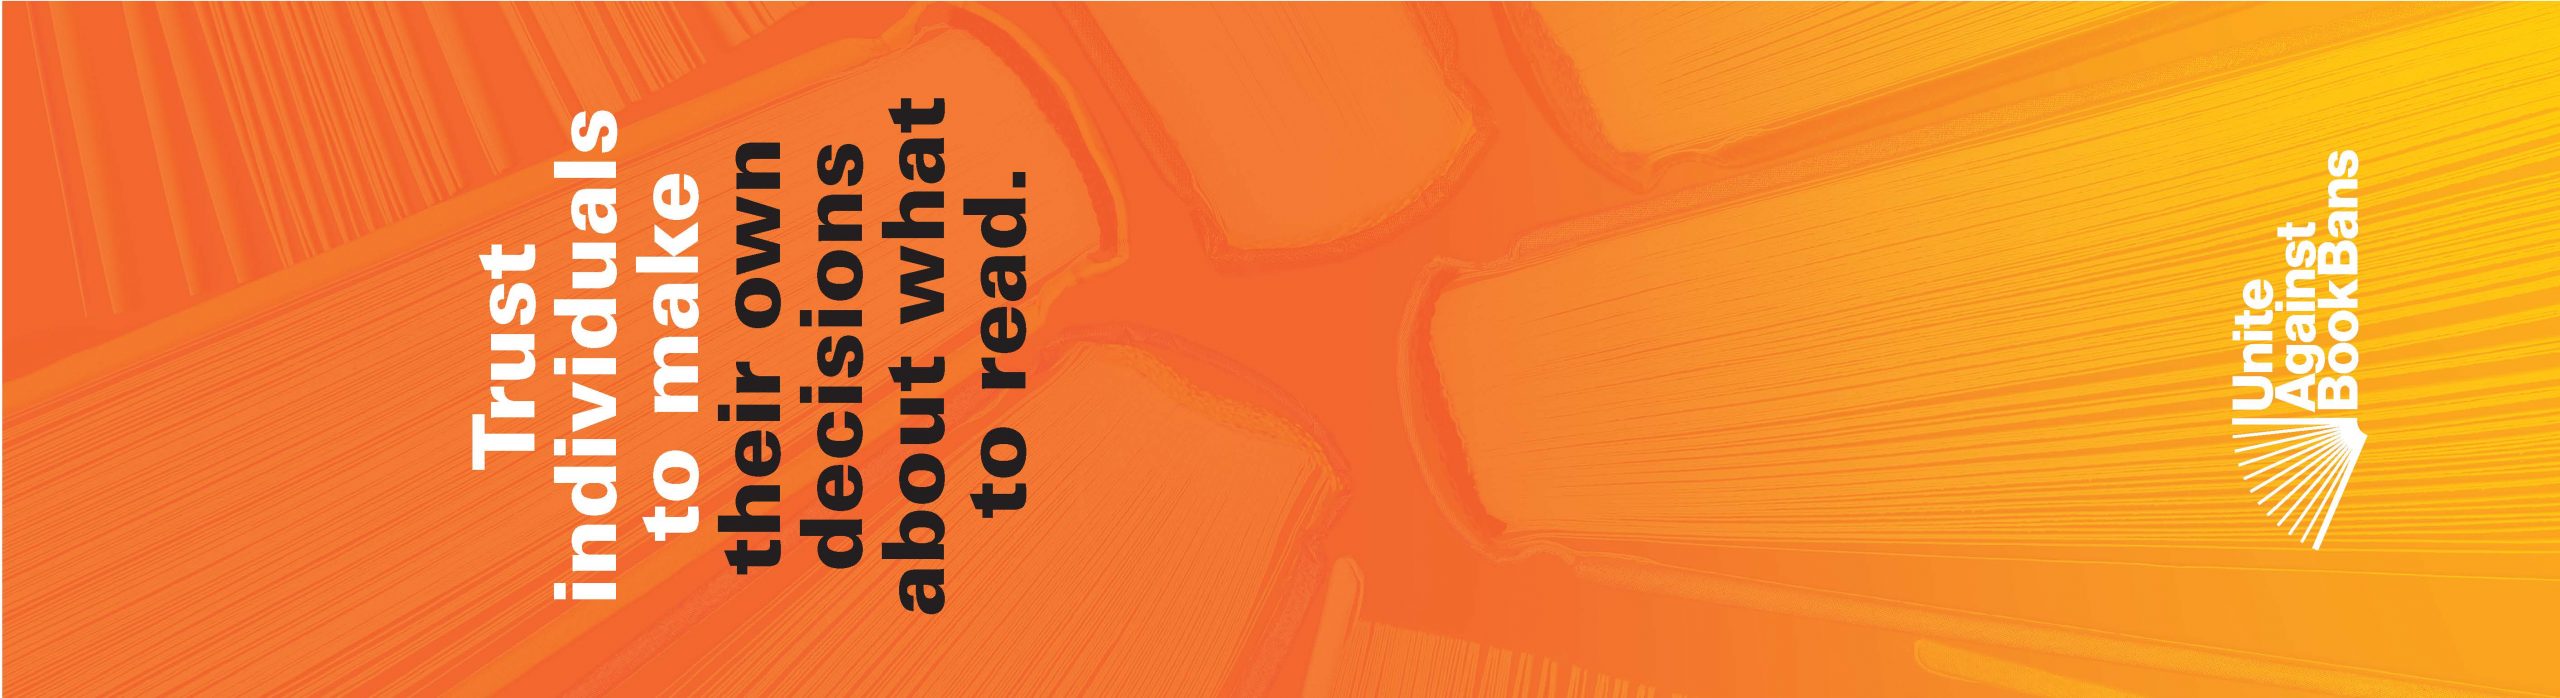 Image of books overlayed with an orange gradient and the Unite Against Book Bans logo. Text reads "Trust individuals to make their own decisions about what to read."